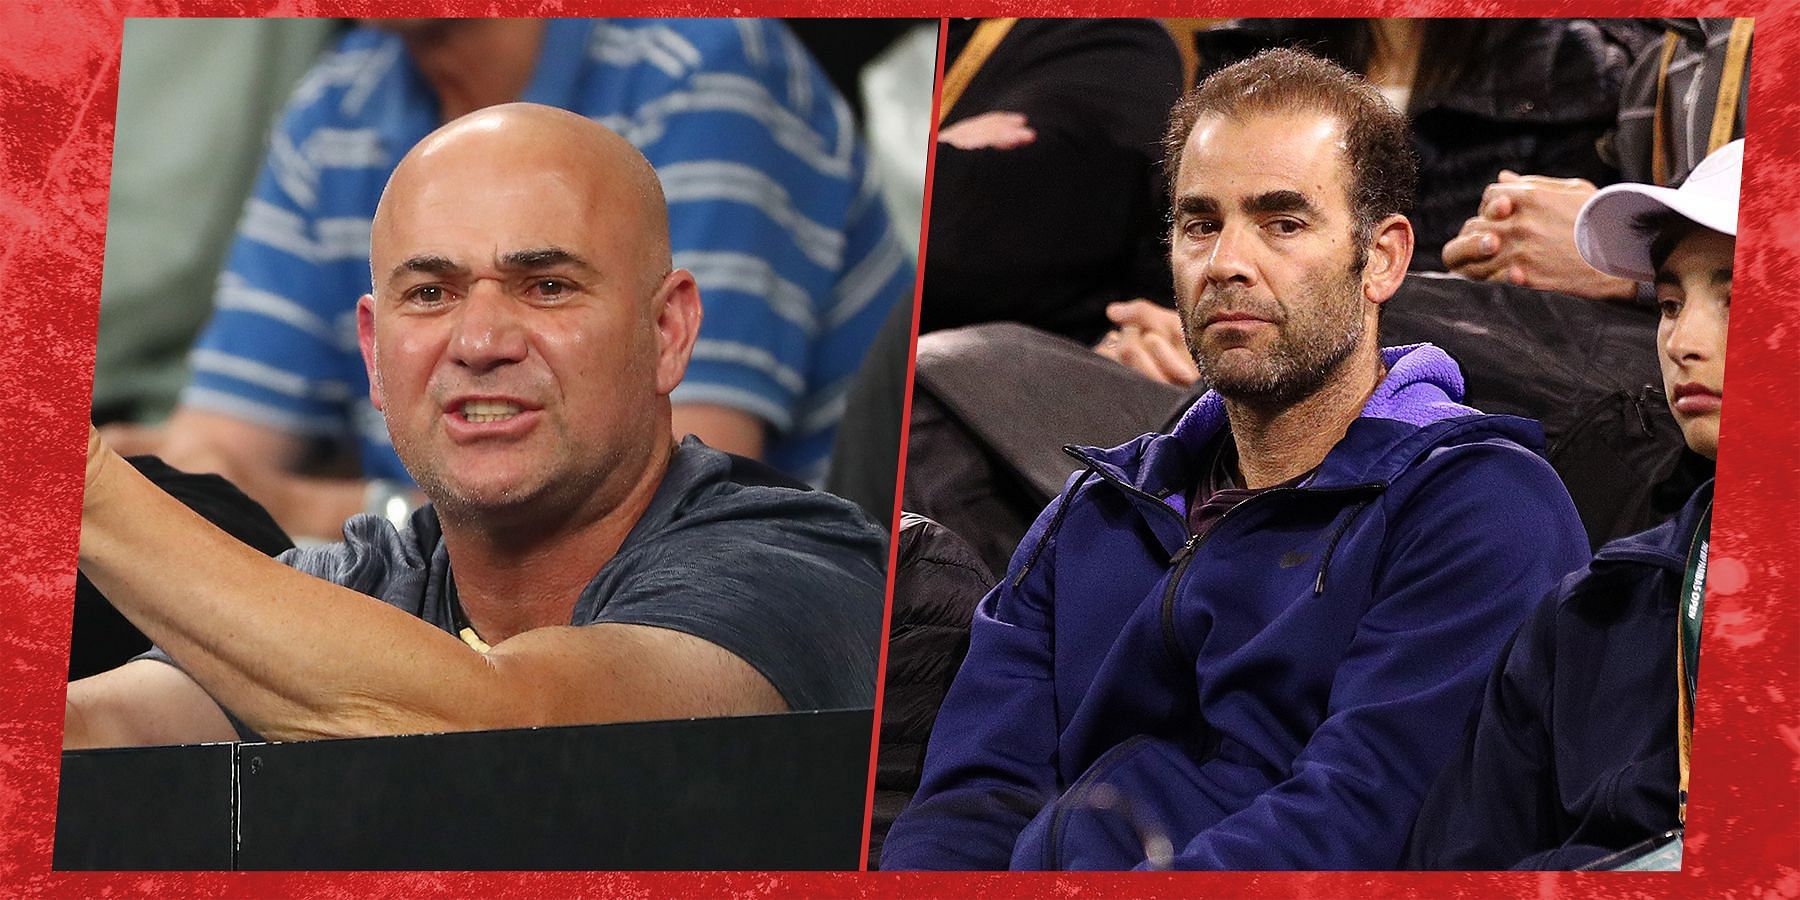 Andre Agassi and Pete Sampras held the World No.1 ranking in the 1990s